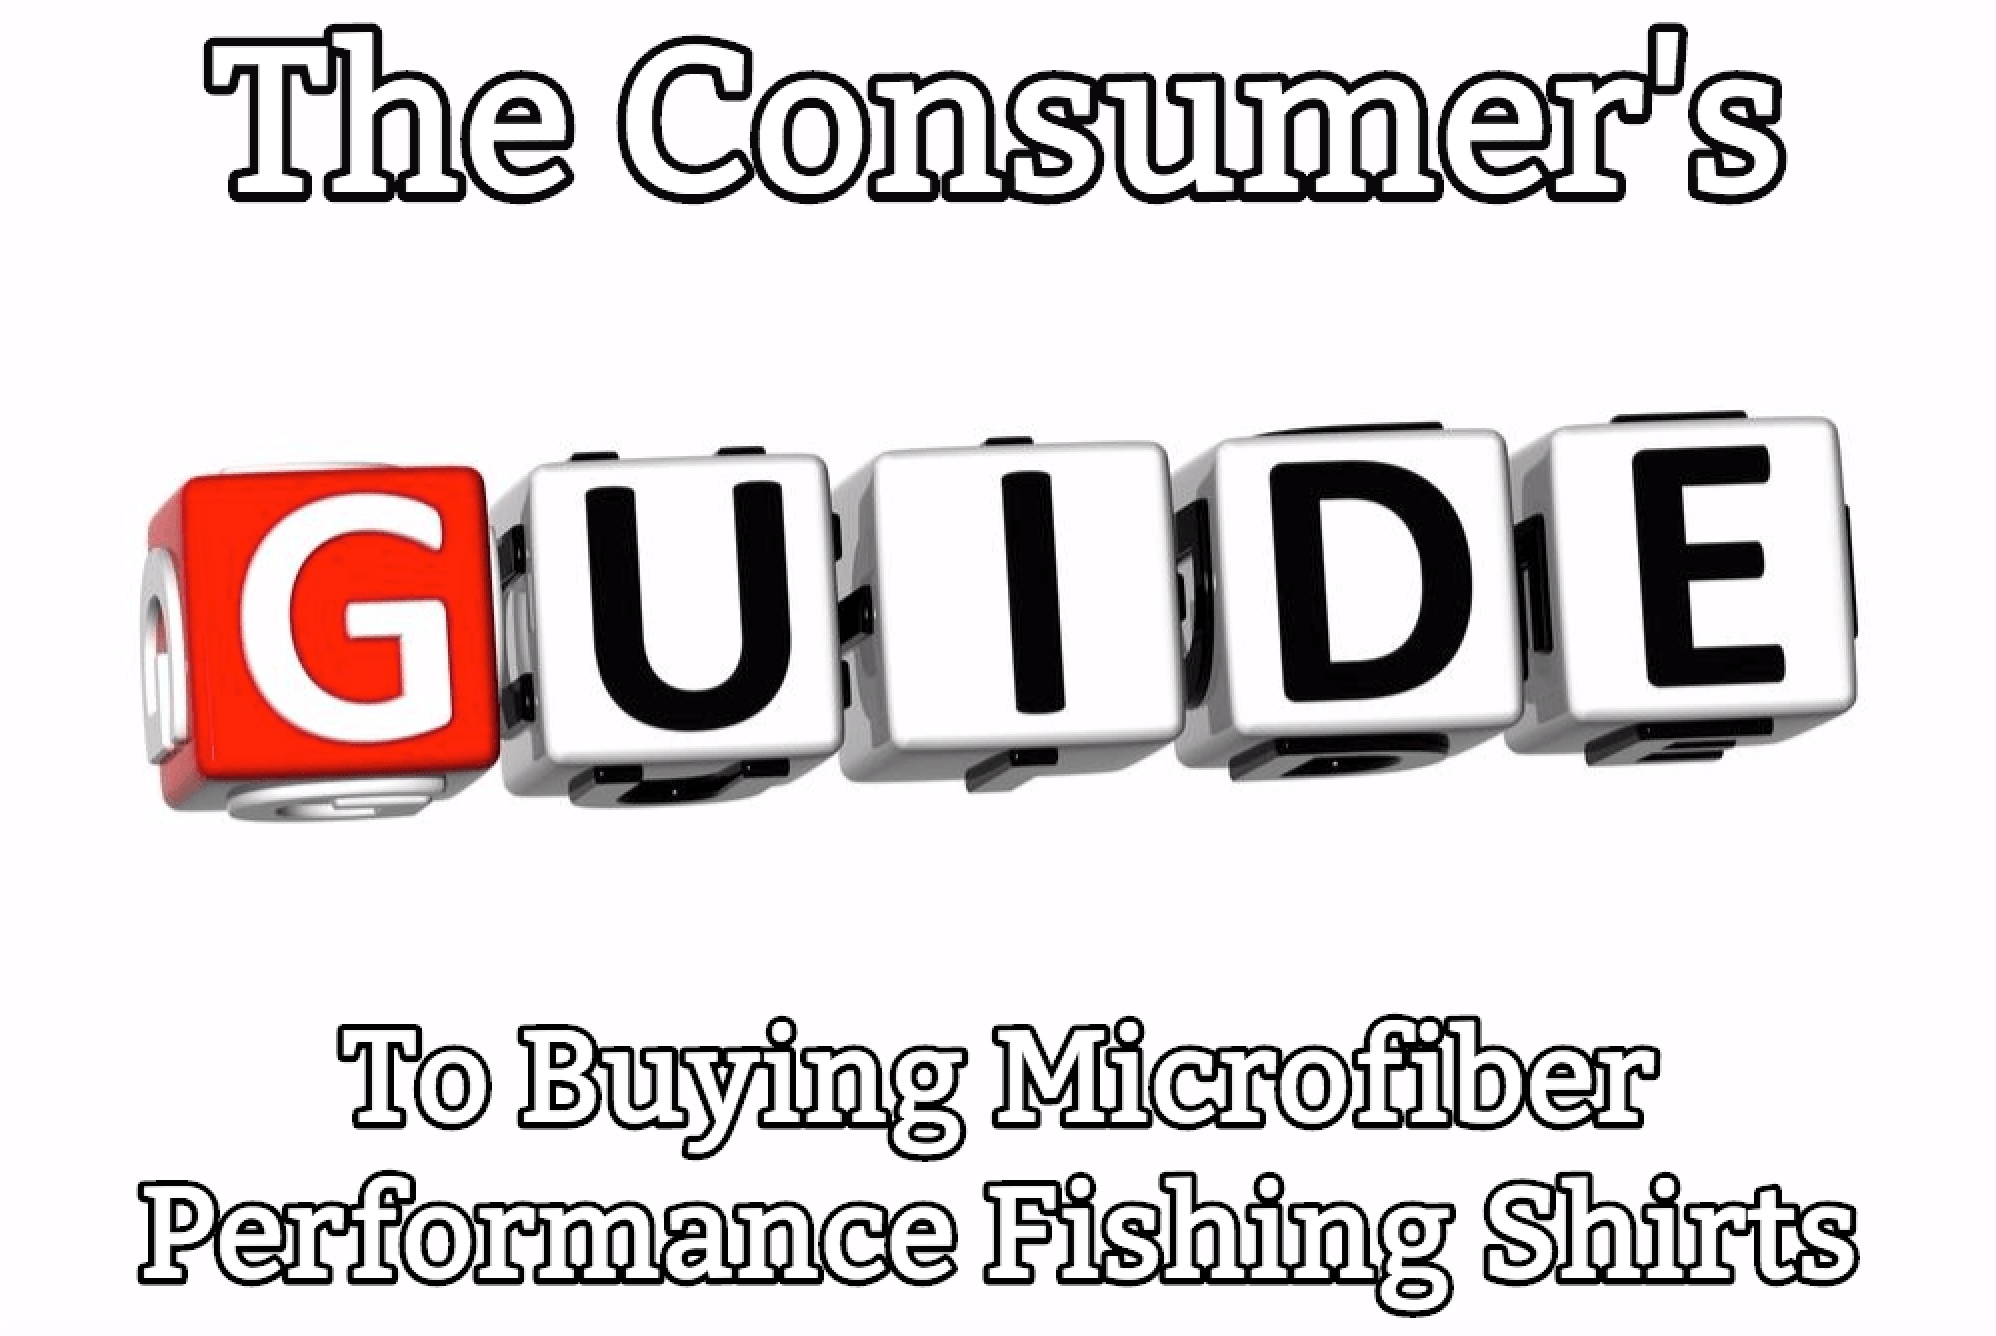 consumer's guide to buying microfiber performance fishing shirts